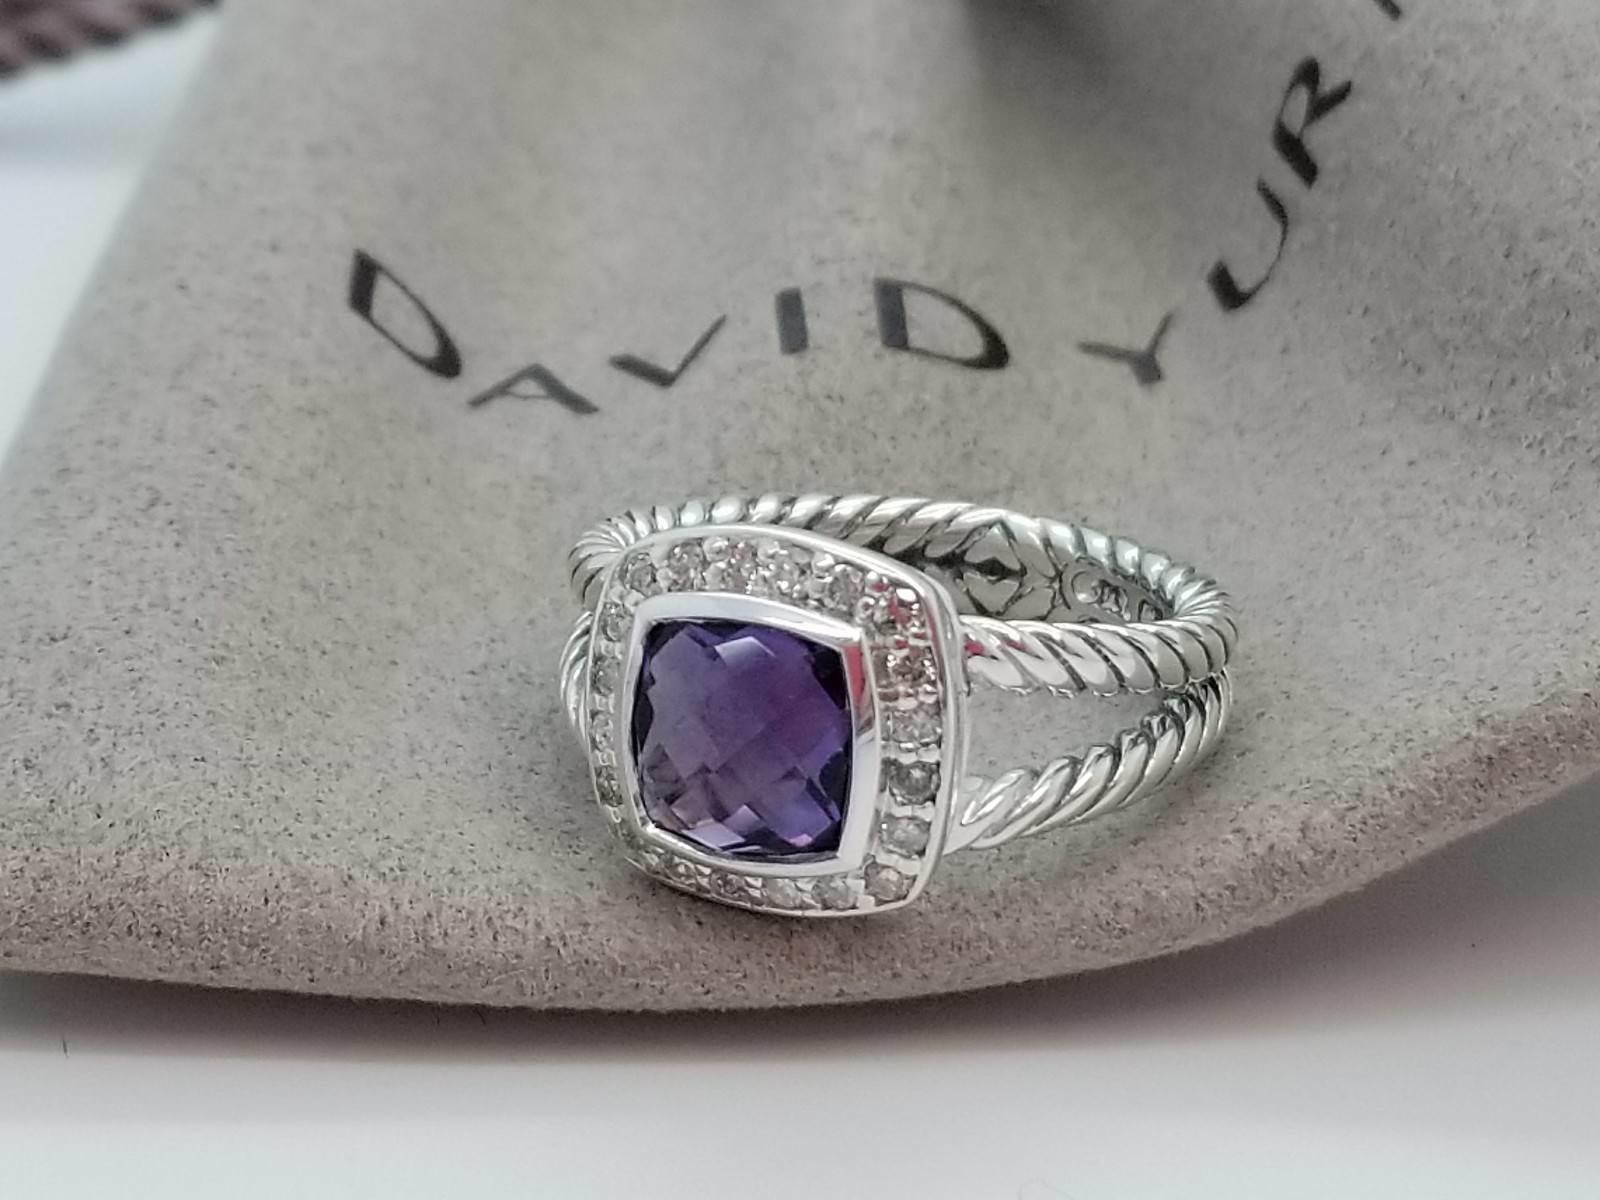 Brand David Yurman 
Type Ring
Condition never worn
Gender Women
Ring size 6
weight 7.5gr
Material Sterling silver
Topaz Amethyst
Topaz 8.1x8.3mm
Ring wide 12.5mm
Stones Diamond 
Diamond 17ct 
Comes with David Yurman  pouch